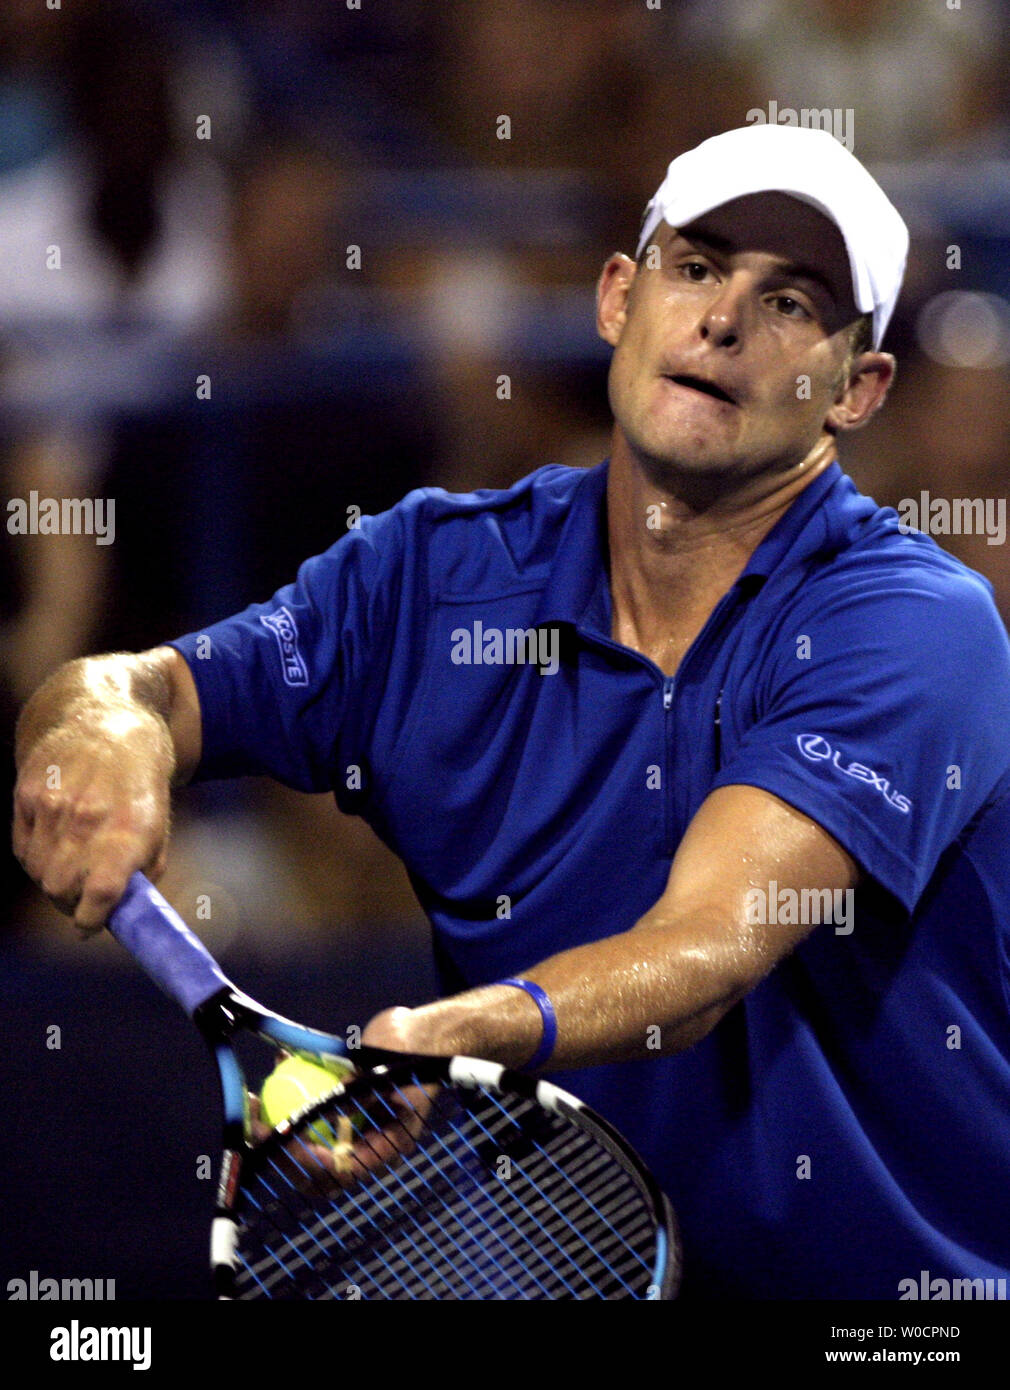 Andy Roddick prepares to serve to Juan Ignacio Chela during the third round of the Legg Mason Tennis Classic held at the William H.G. Fitzgerald Tennis Center in Washignton D.C. on August 4, 2005. Roddick defeated Giovanni 3 set to 2. (UPI Photo/Kevin Dietsch) Stock Photo